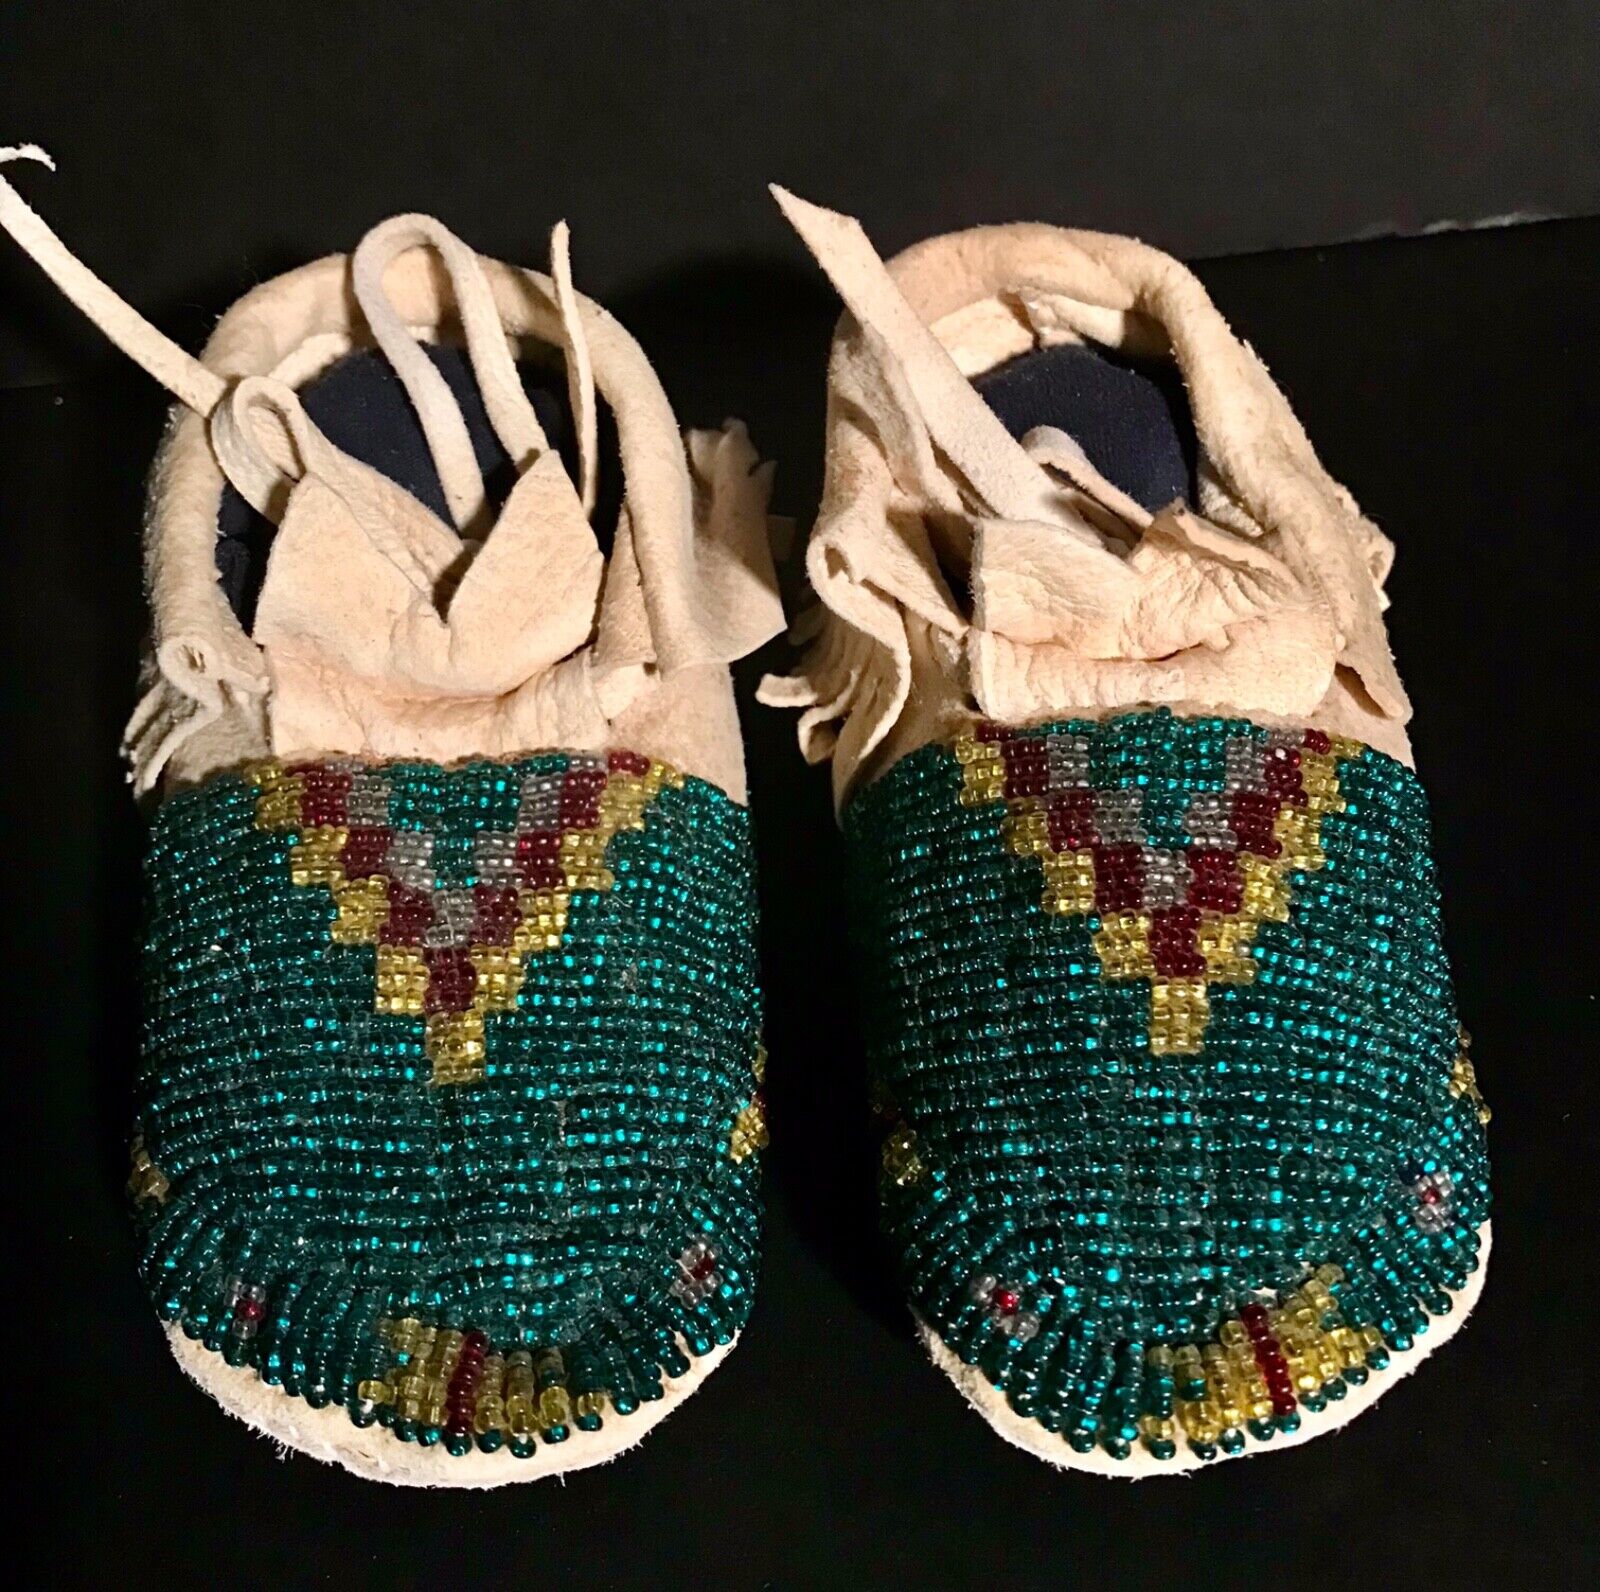 Plains Beaded On Hide Child’s Moccasins, Excellent Condition, Late 20th C